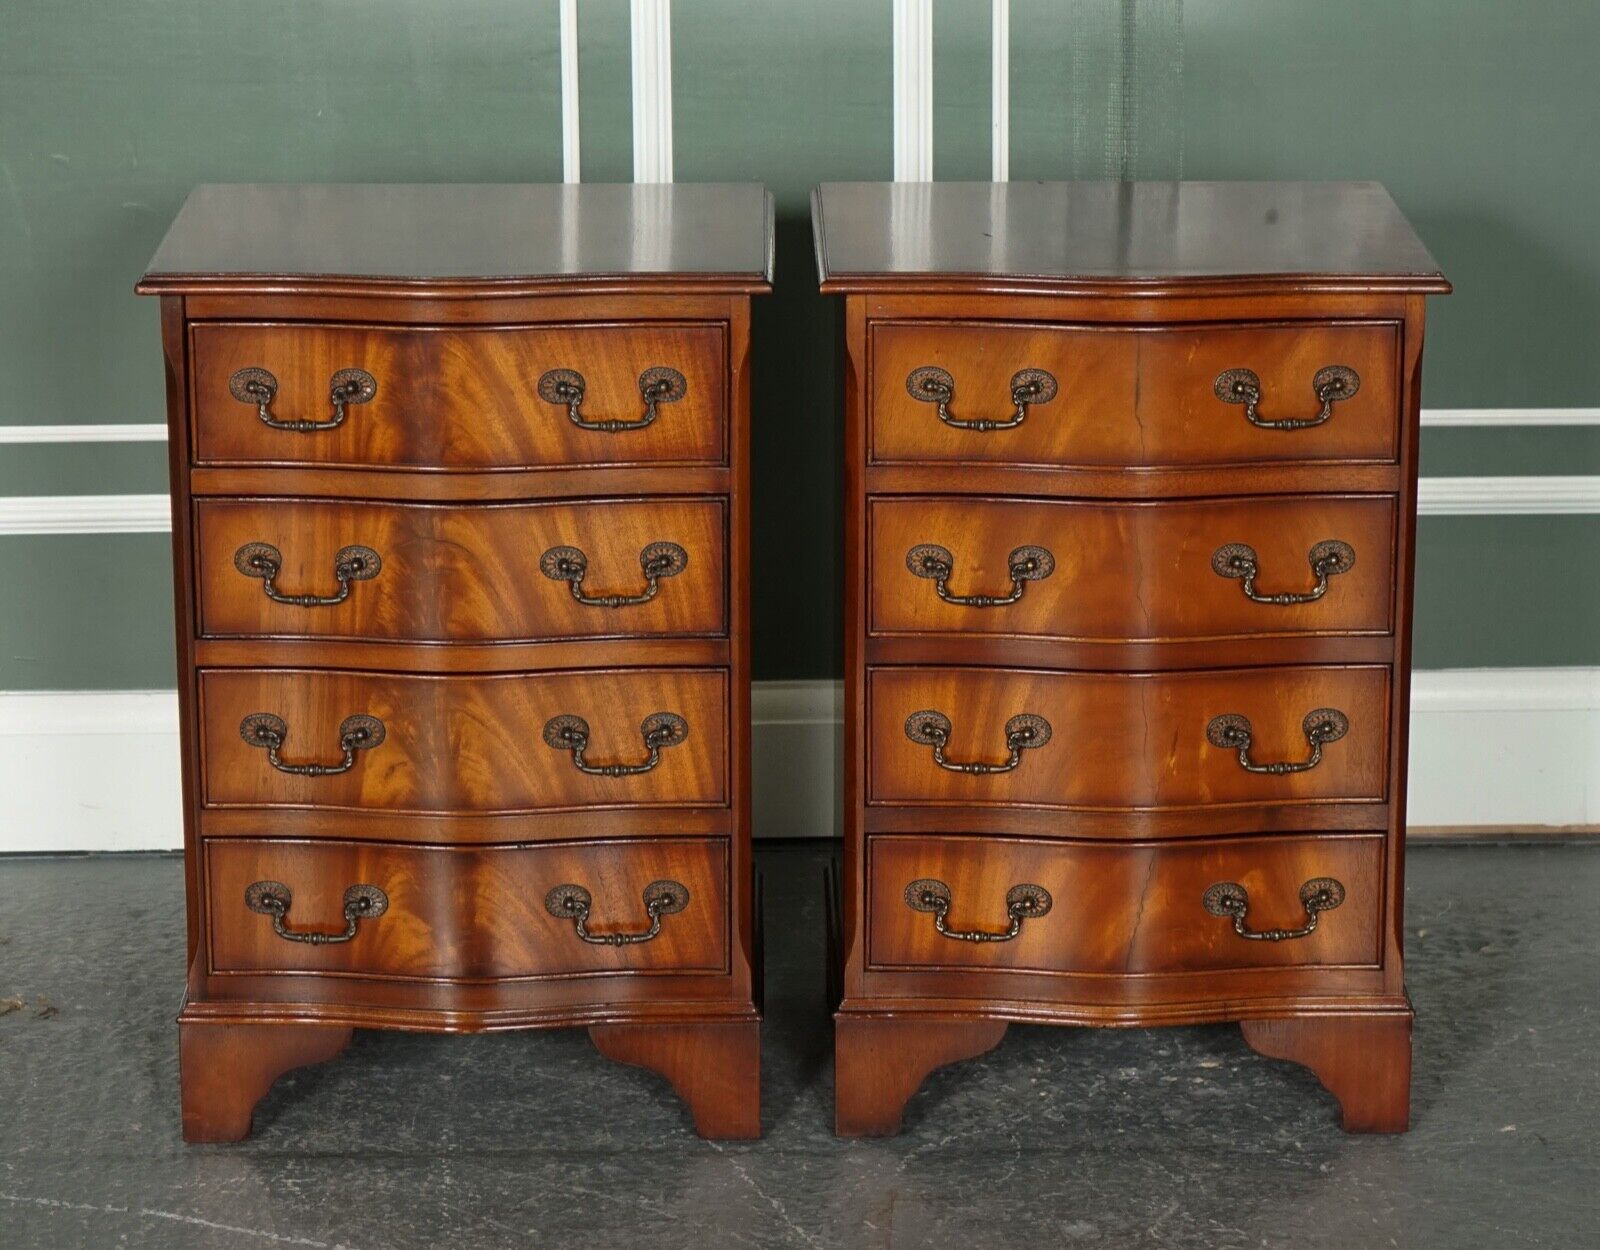 PAIR OF GEORGIAN STYLE NIGHTSTANDS BEDSIDE END SIDE TABLES